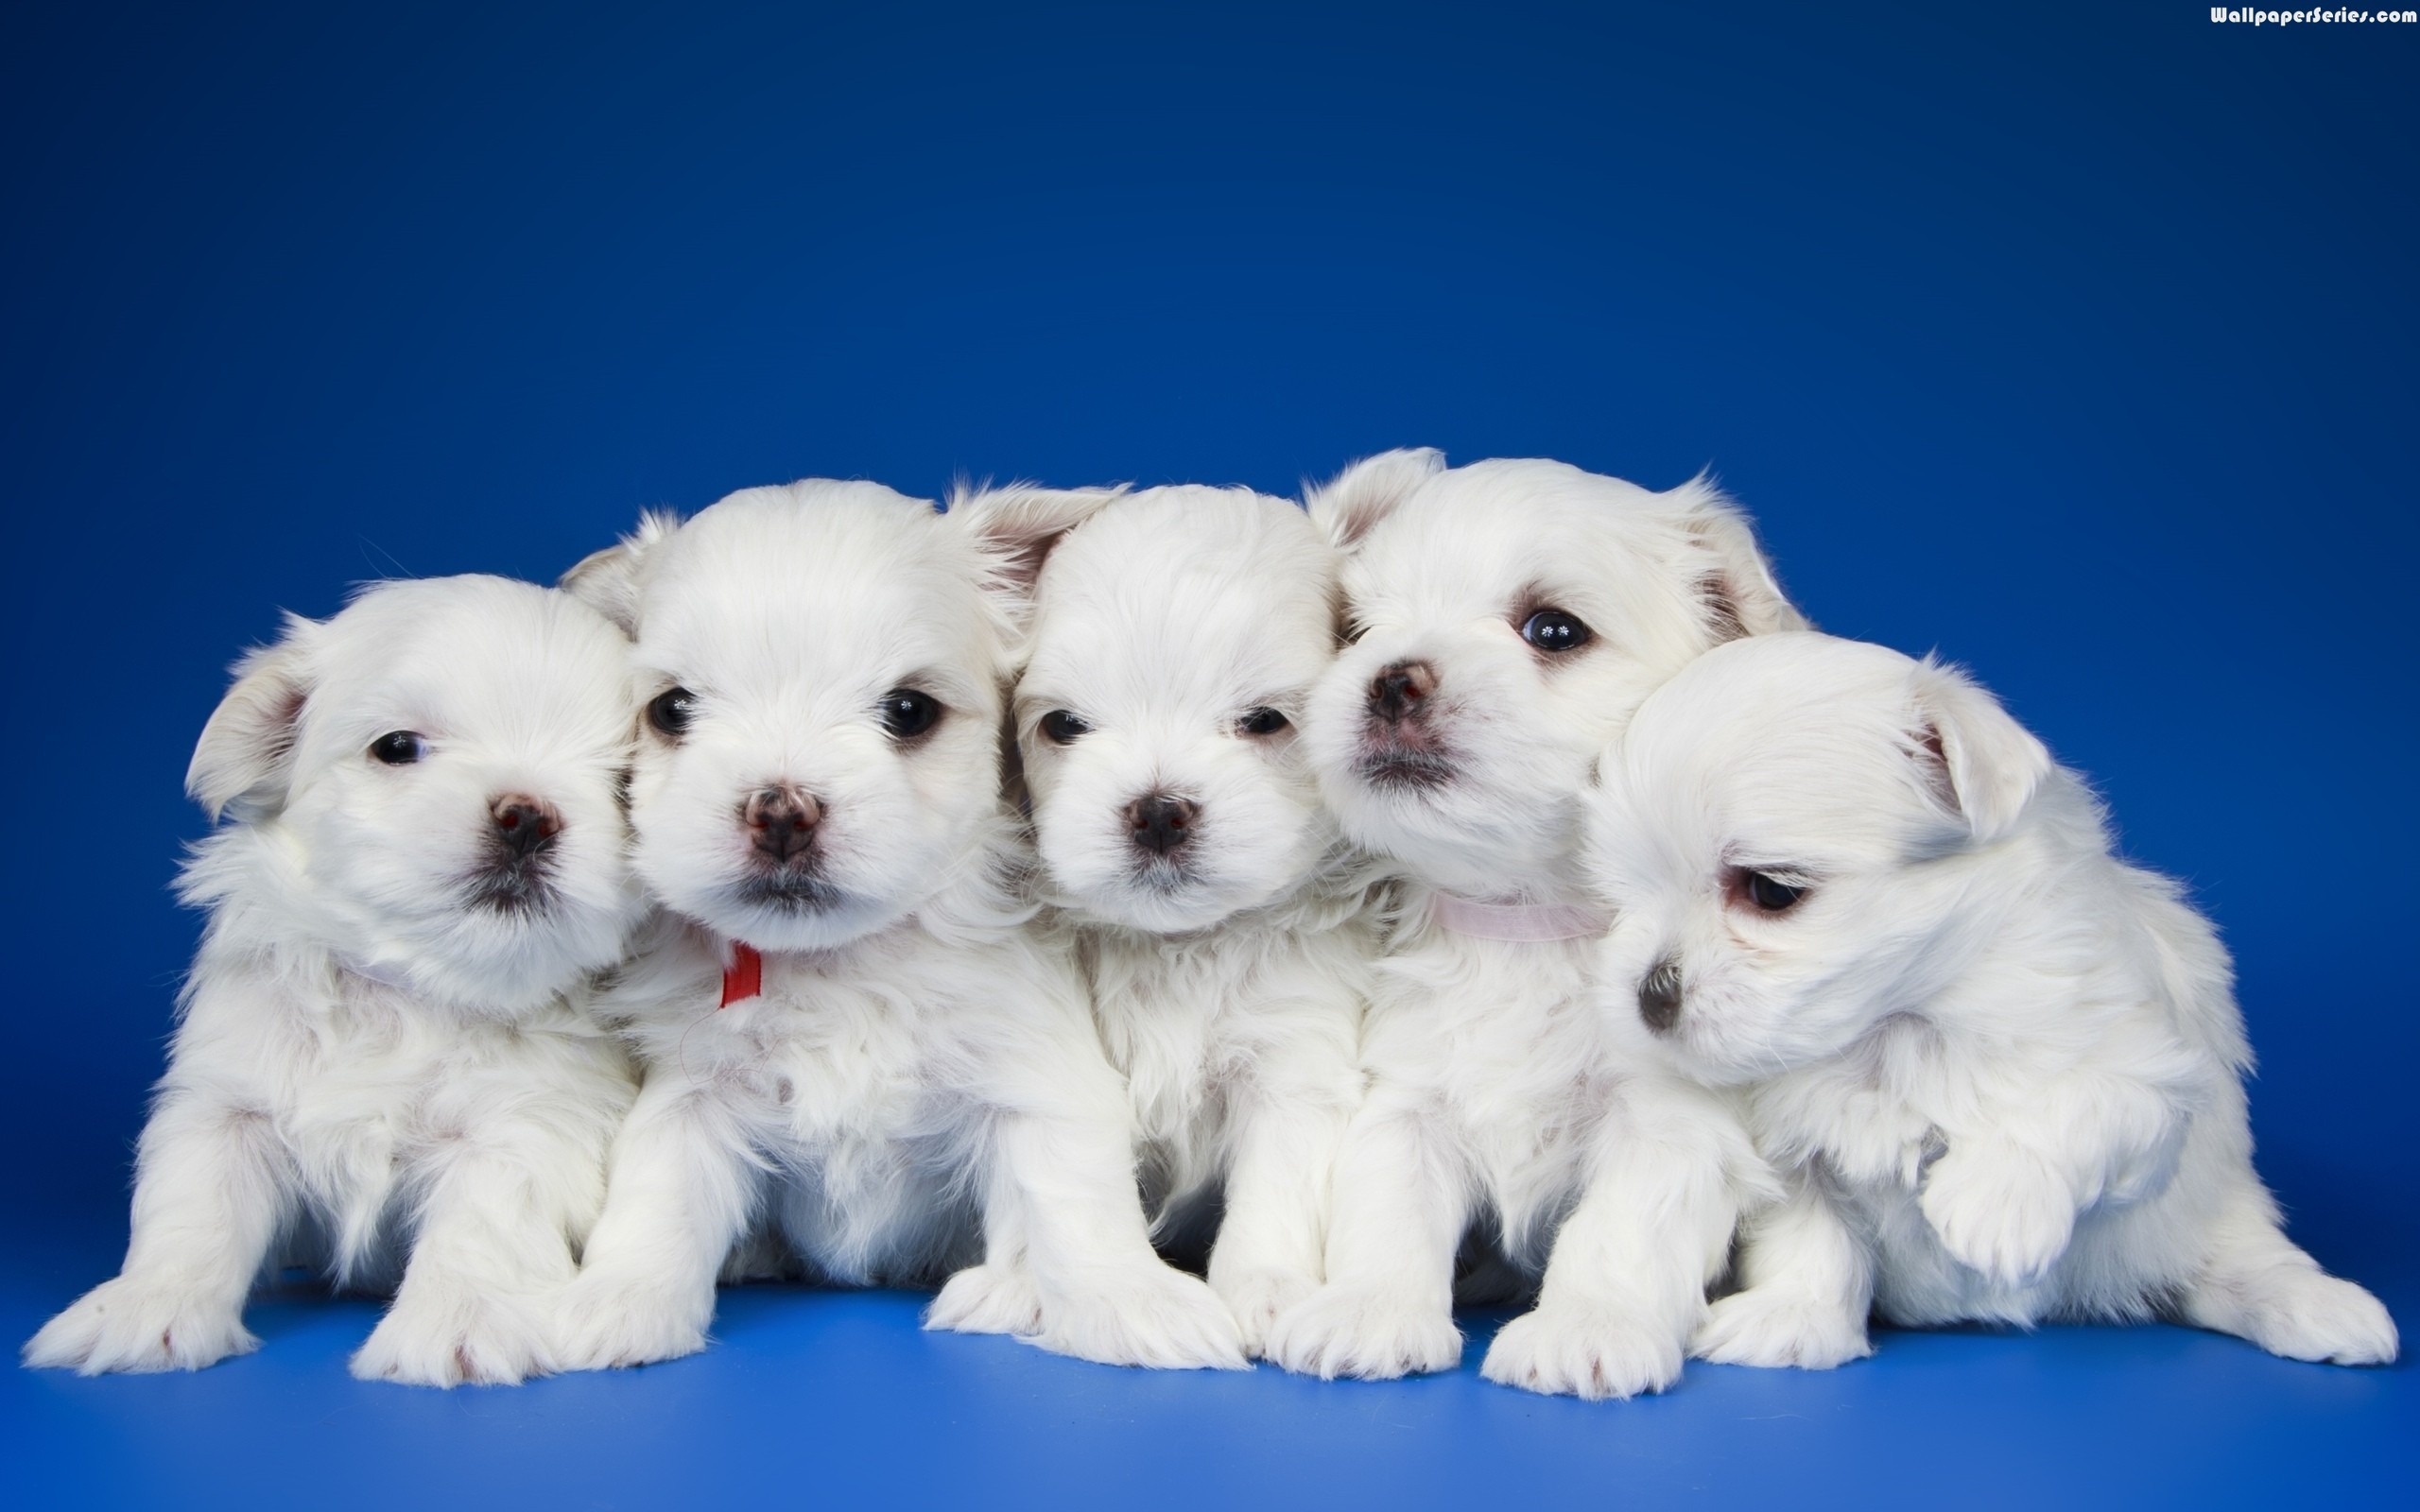 Cute Puppies Wallpaper 1080p Free Download Puppy Images - Cute Puppies In Groups , HD Wallpaper & Backgrounds